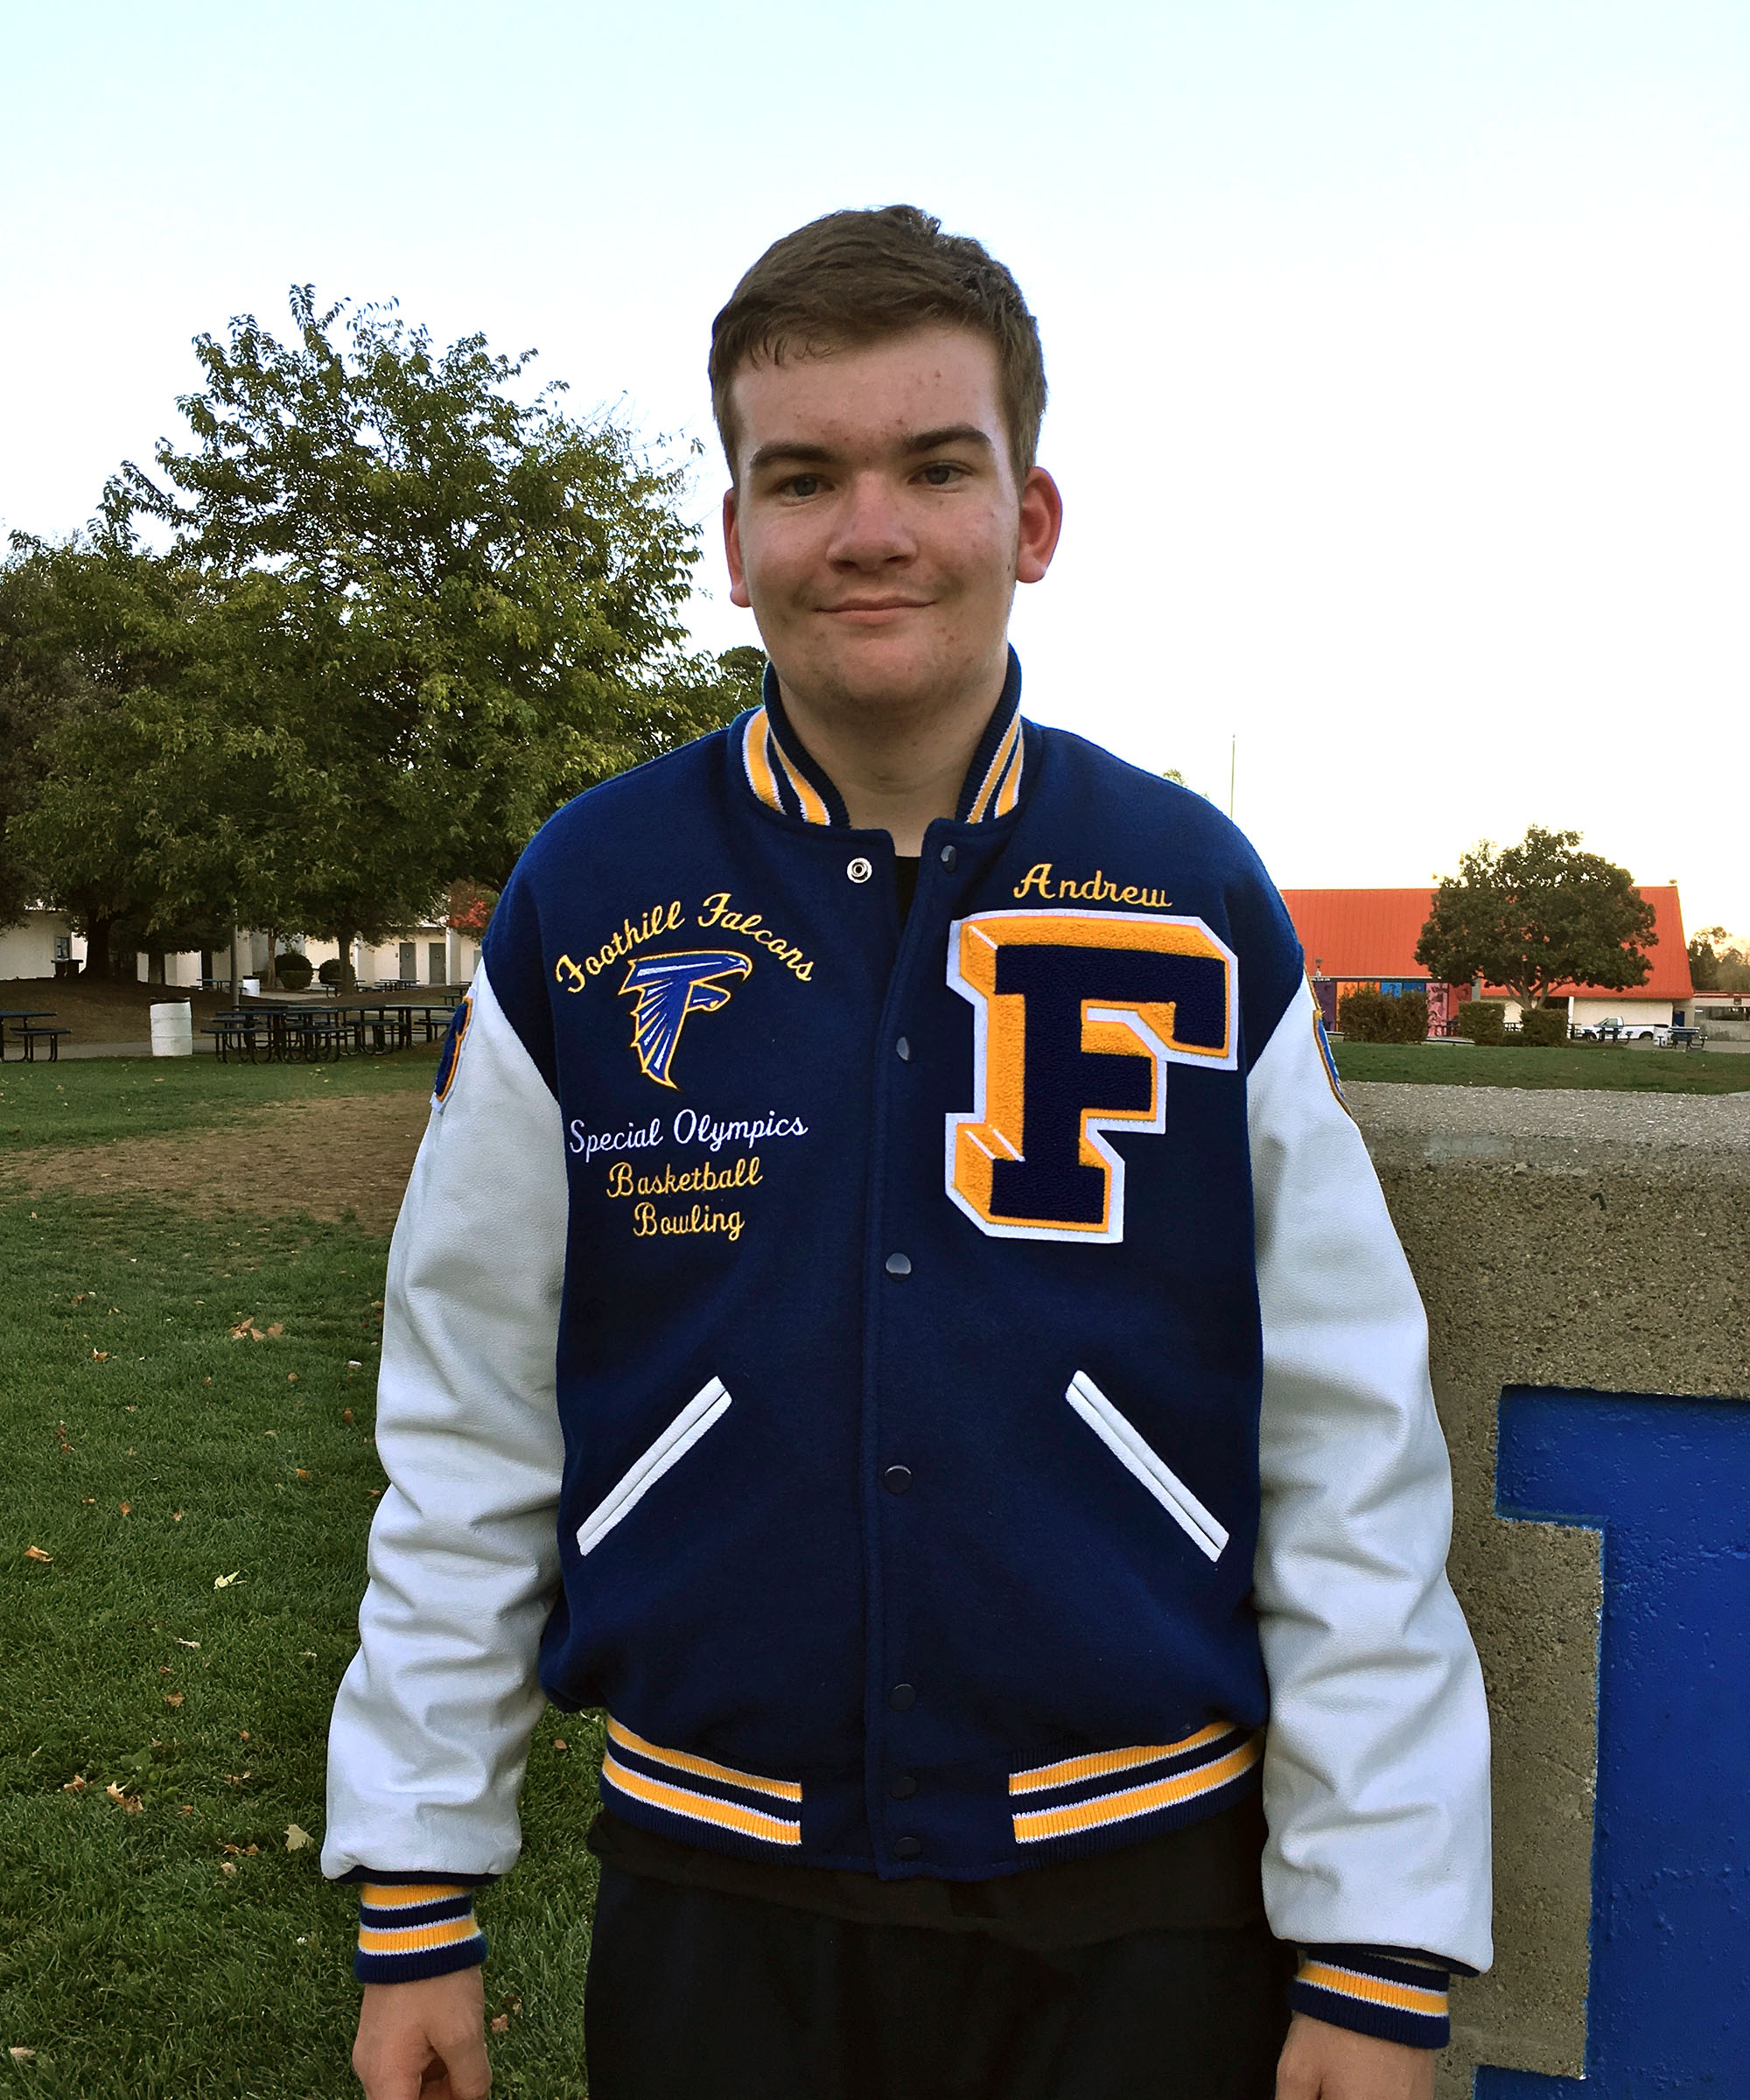 Andrew and Letterman Jacket